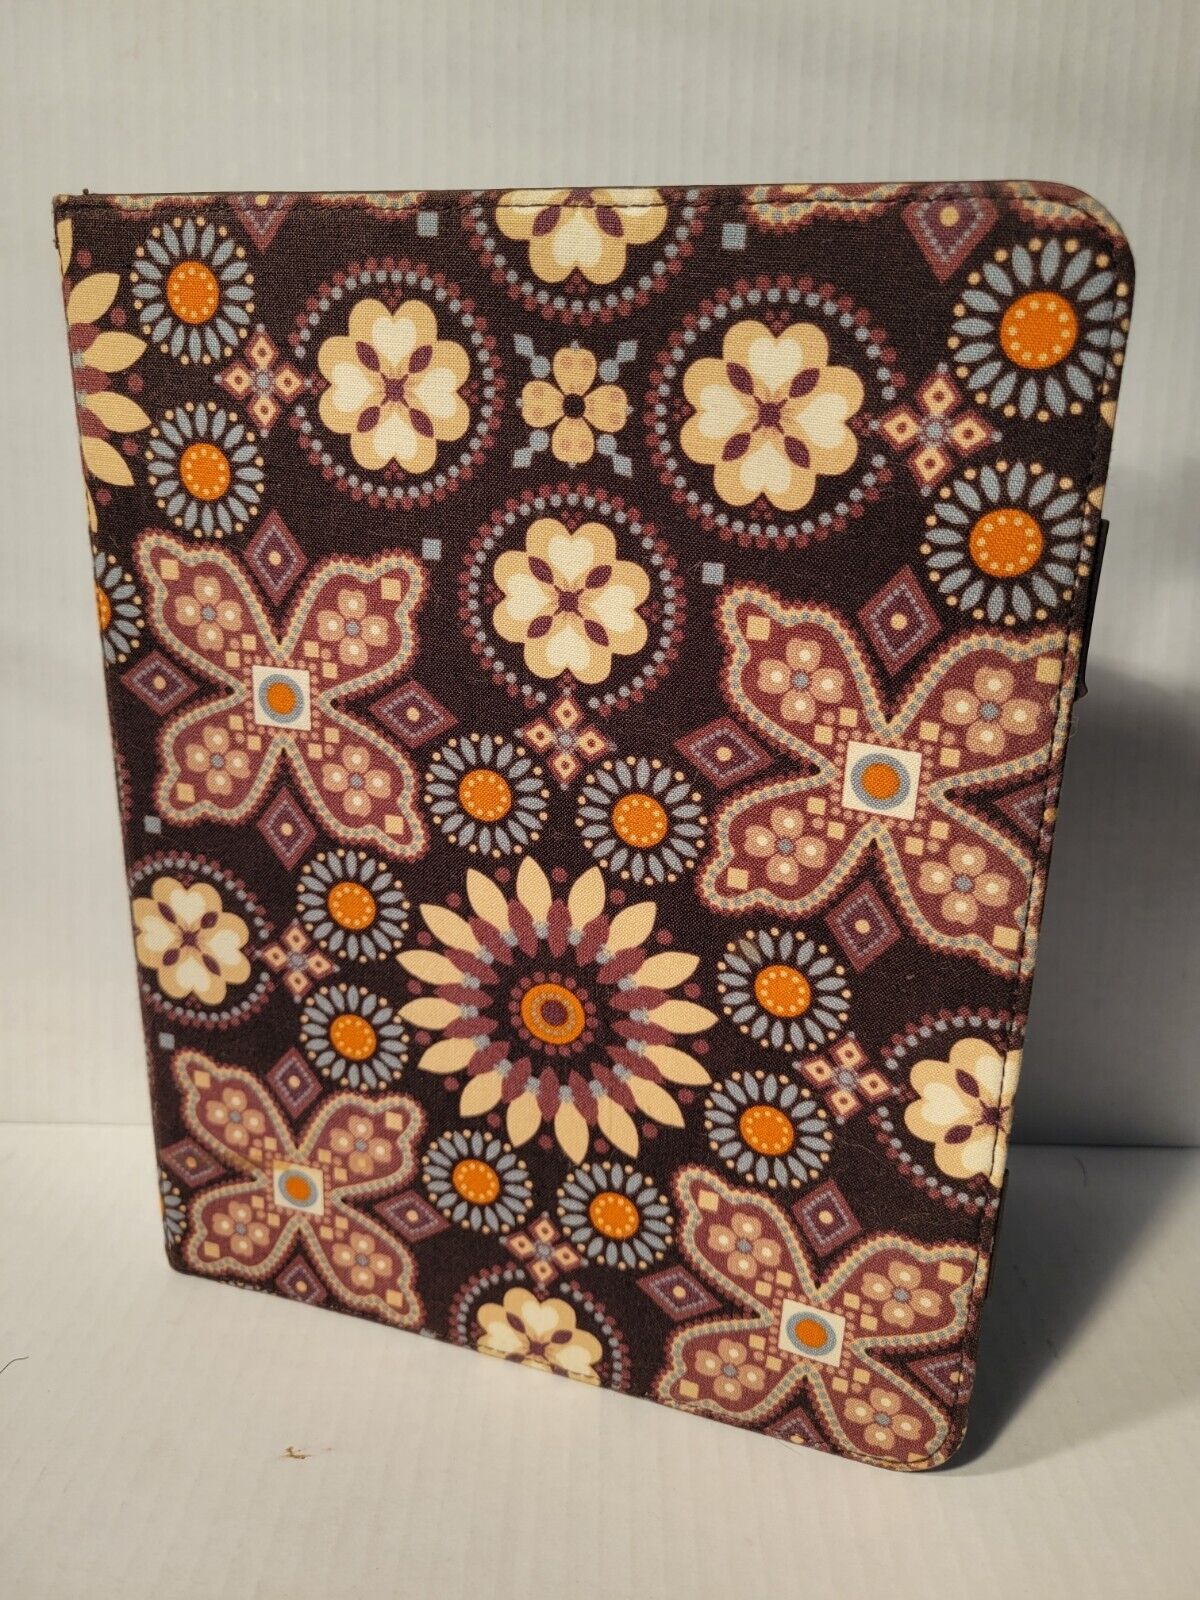 Vera Bradley Canyon Patters Travel Nook/Tablet Case